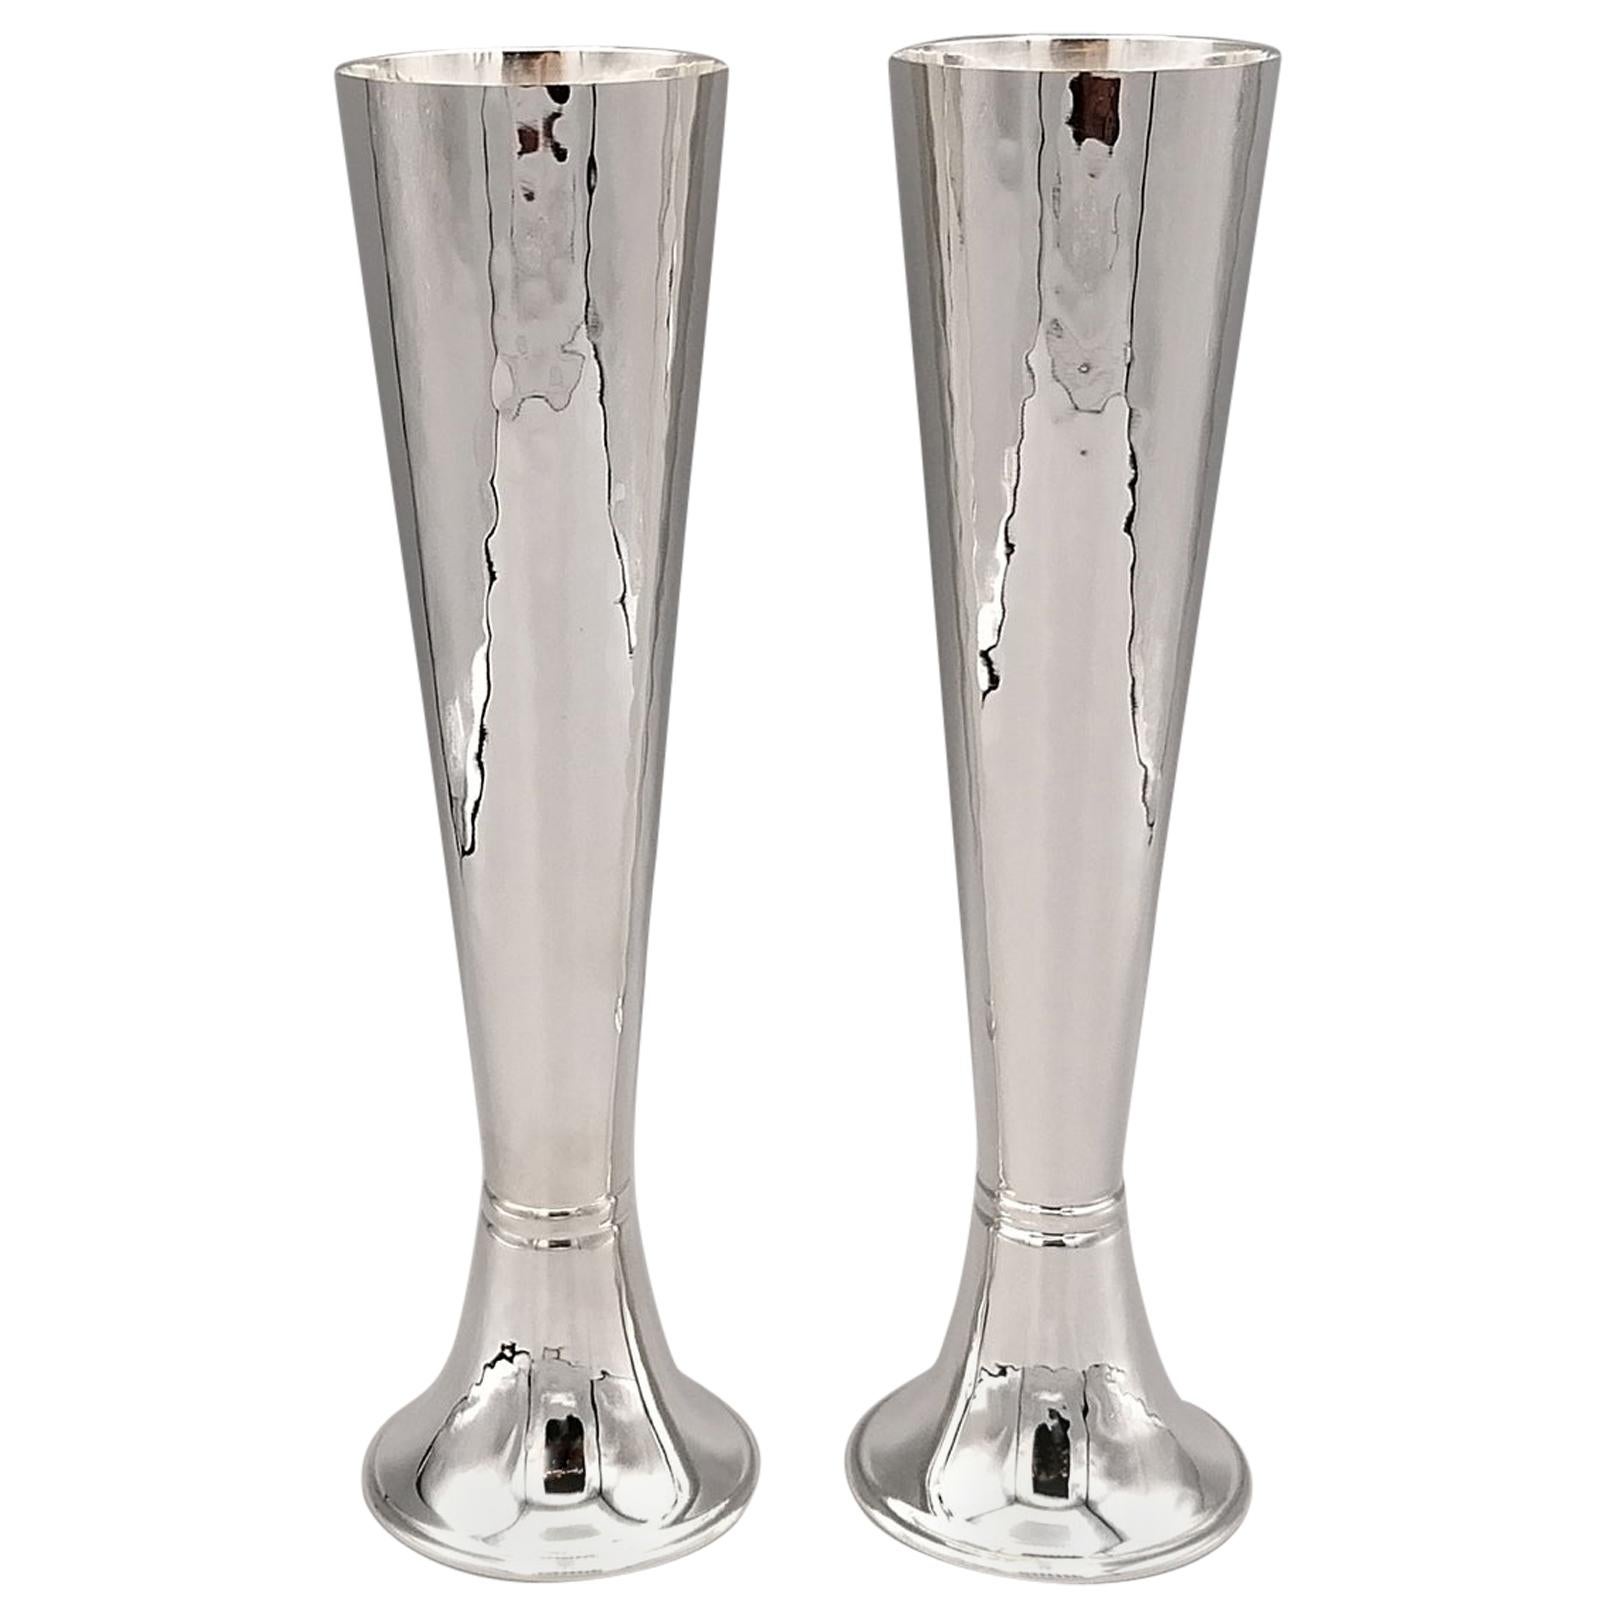 Pair of 20th Century Italian Sterling Silver Champagne Flutes-Vases-Candlesticks